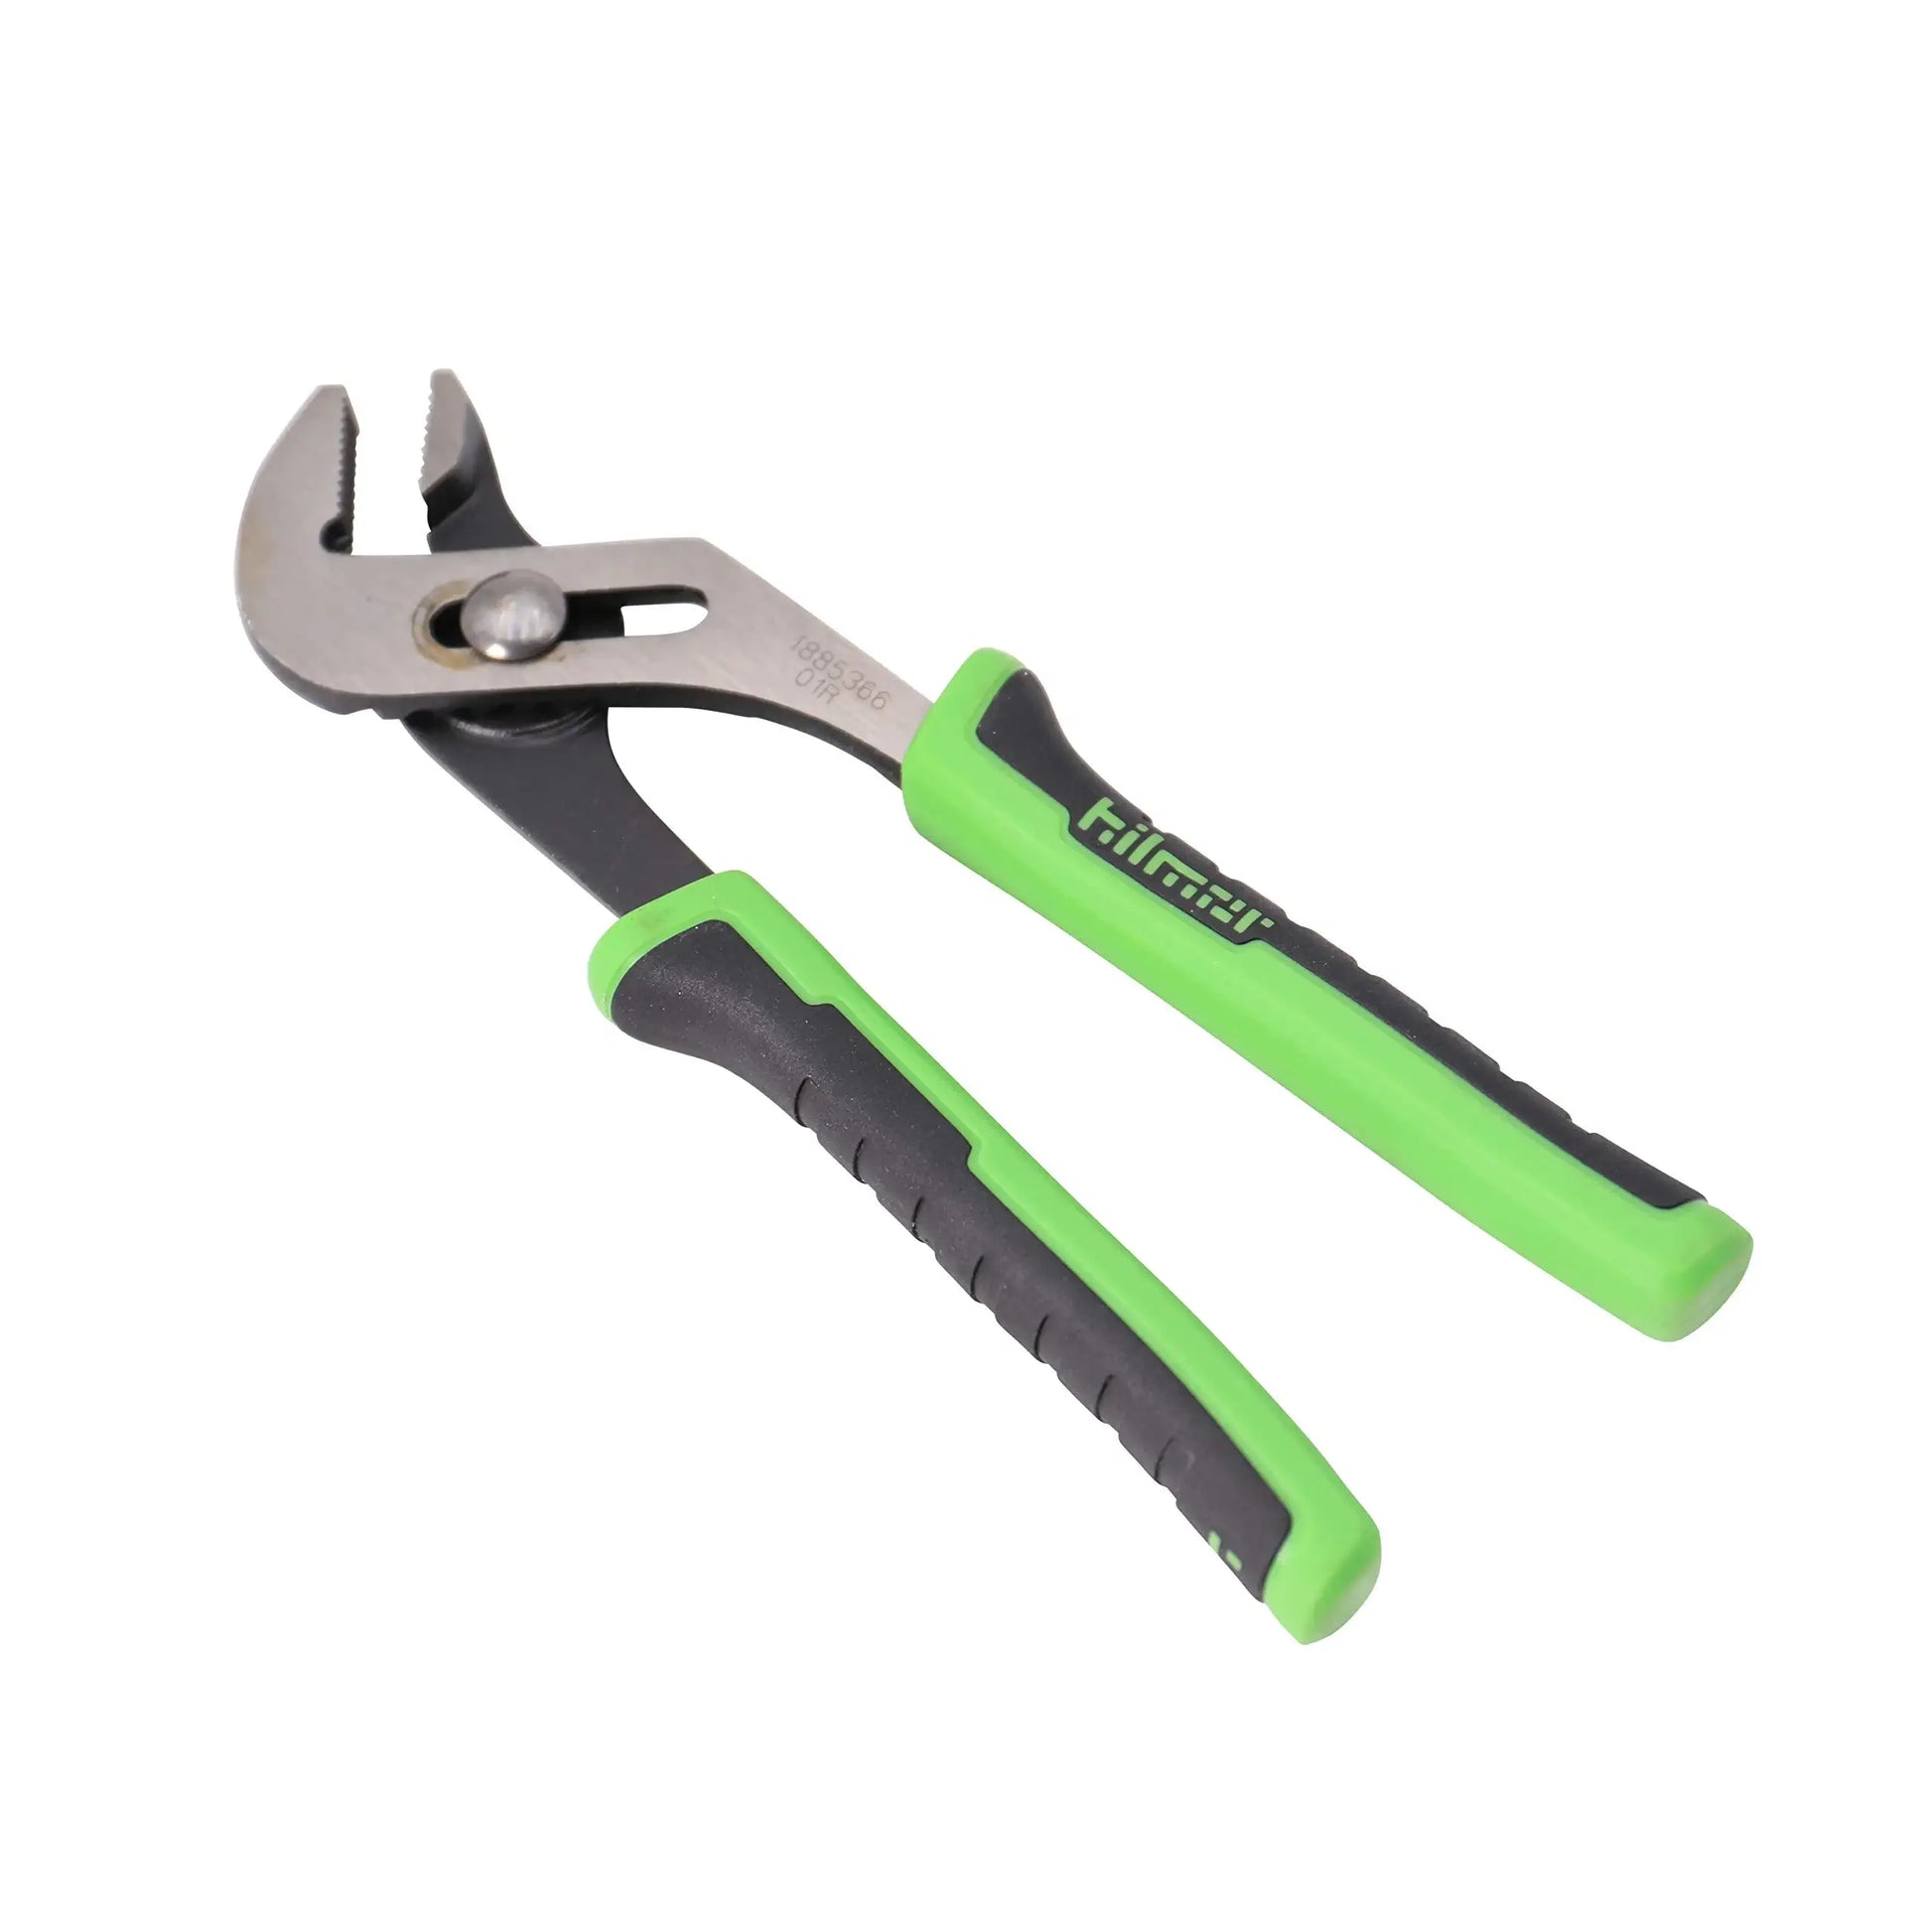 Hilmor 8 Tongue & Groove Plier with Rubber Handle Grip, Black & Green, GJP8 1885366 Fourth